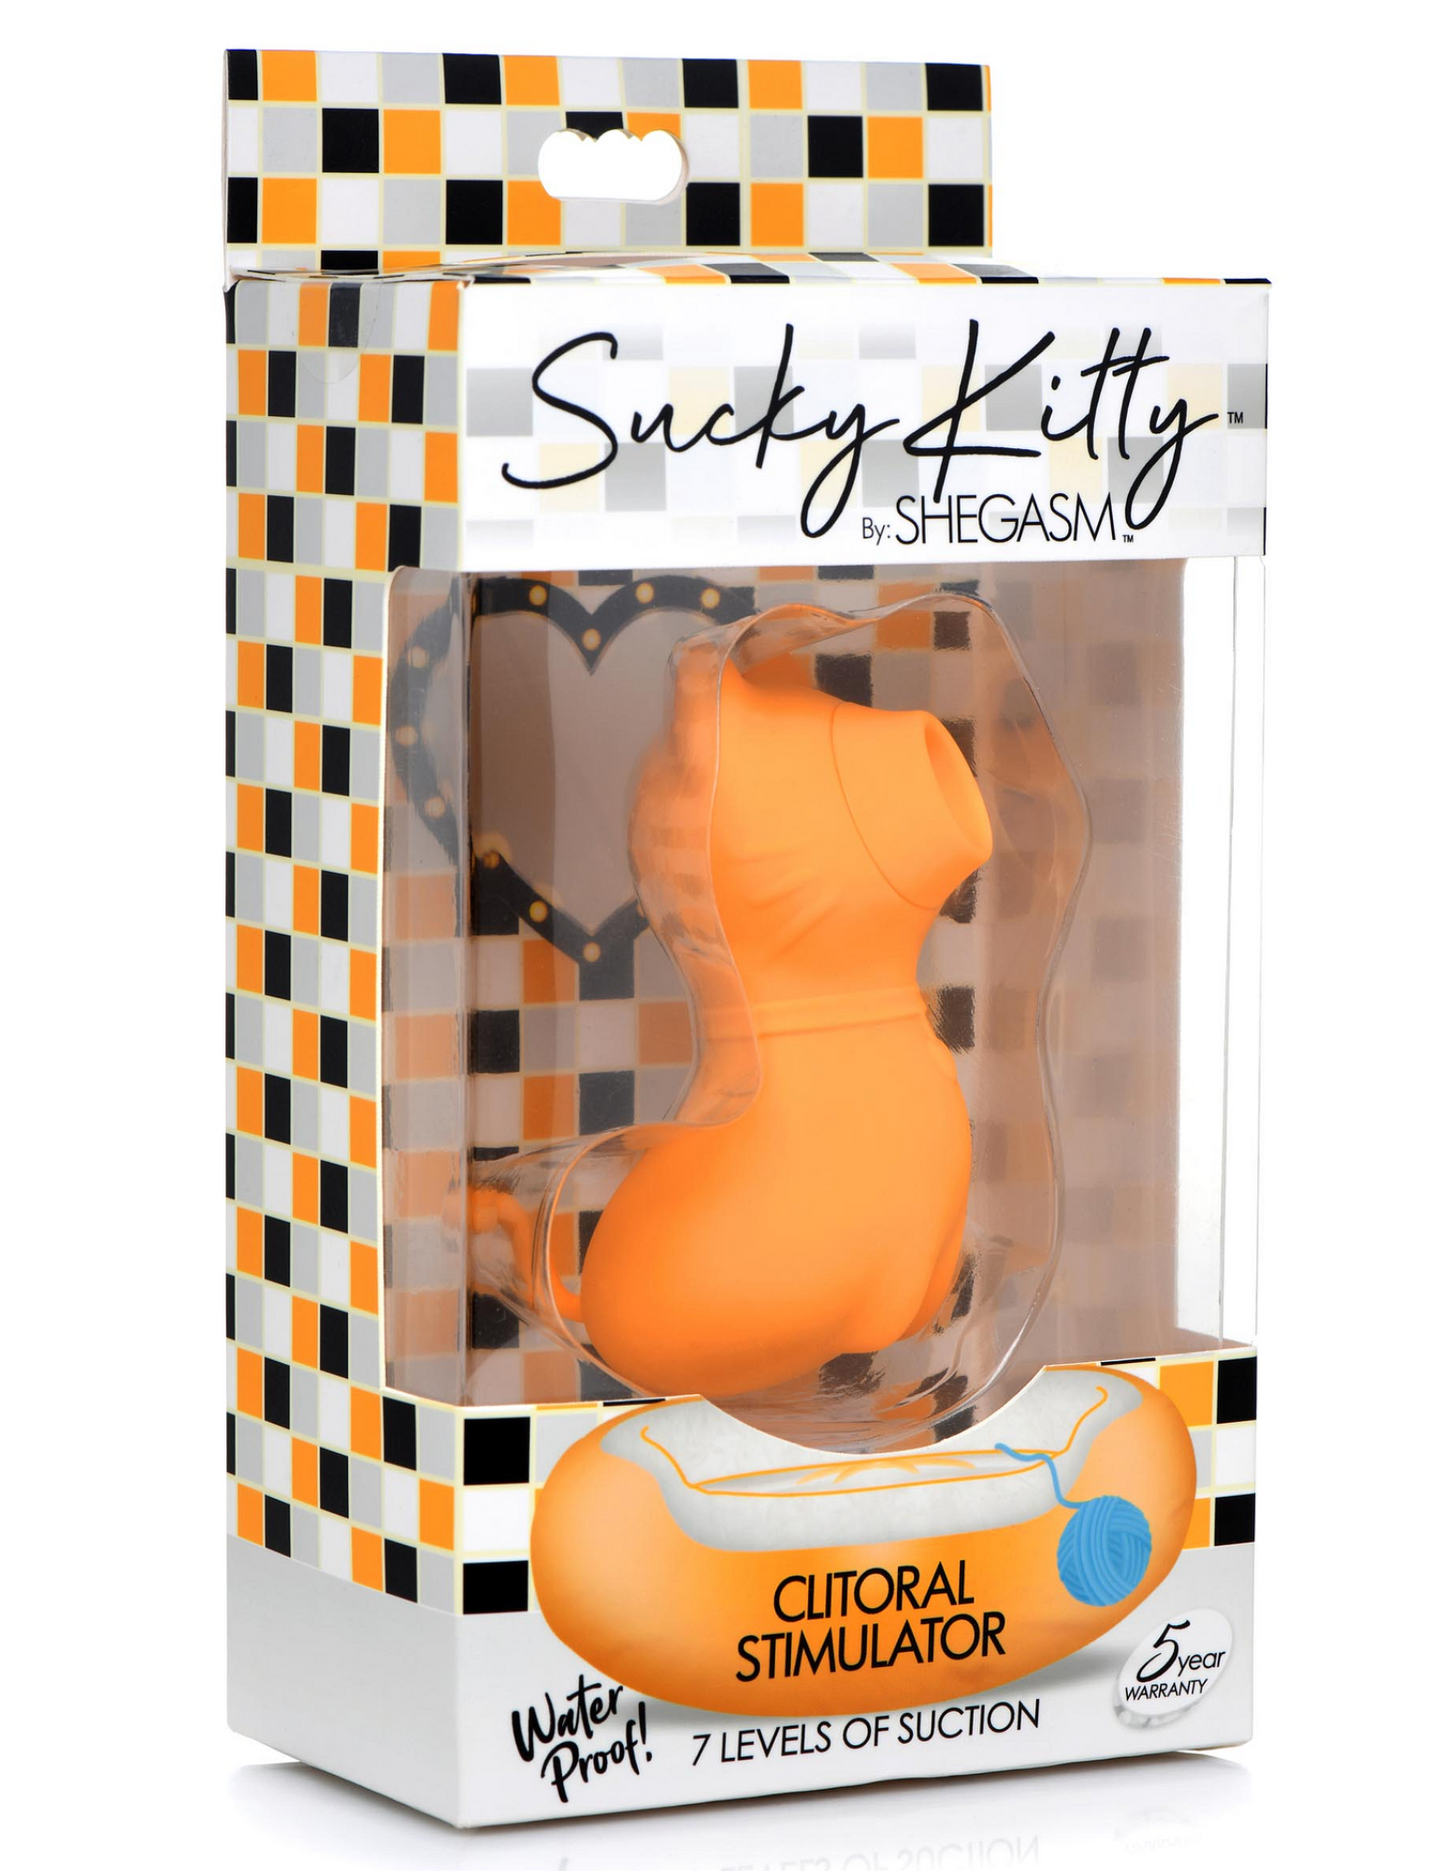 Photo shows the front of the box for the Shegasm Sucky Kitty Clitoral Stimulator from XR Brands (orange).